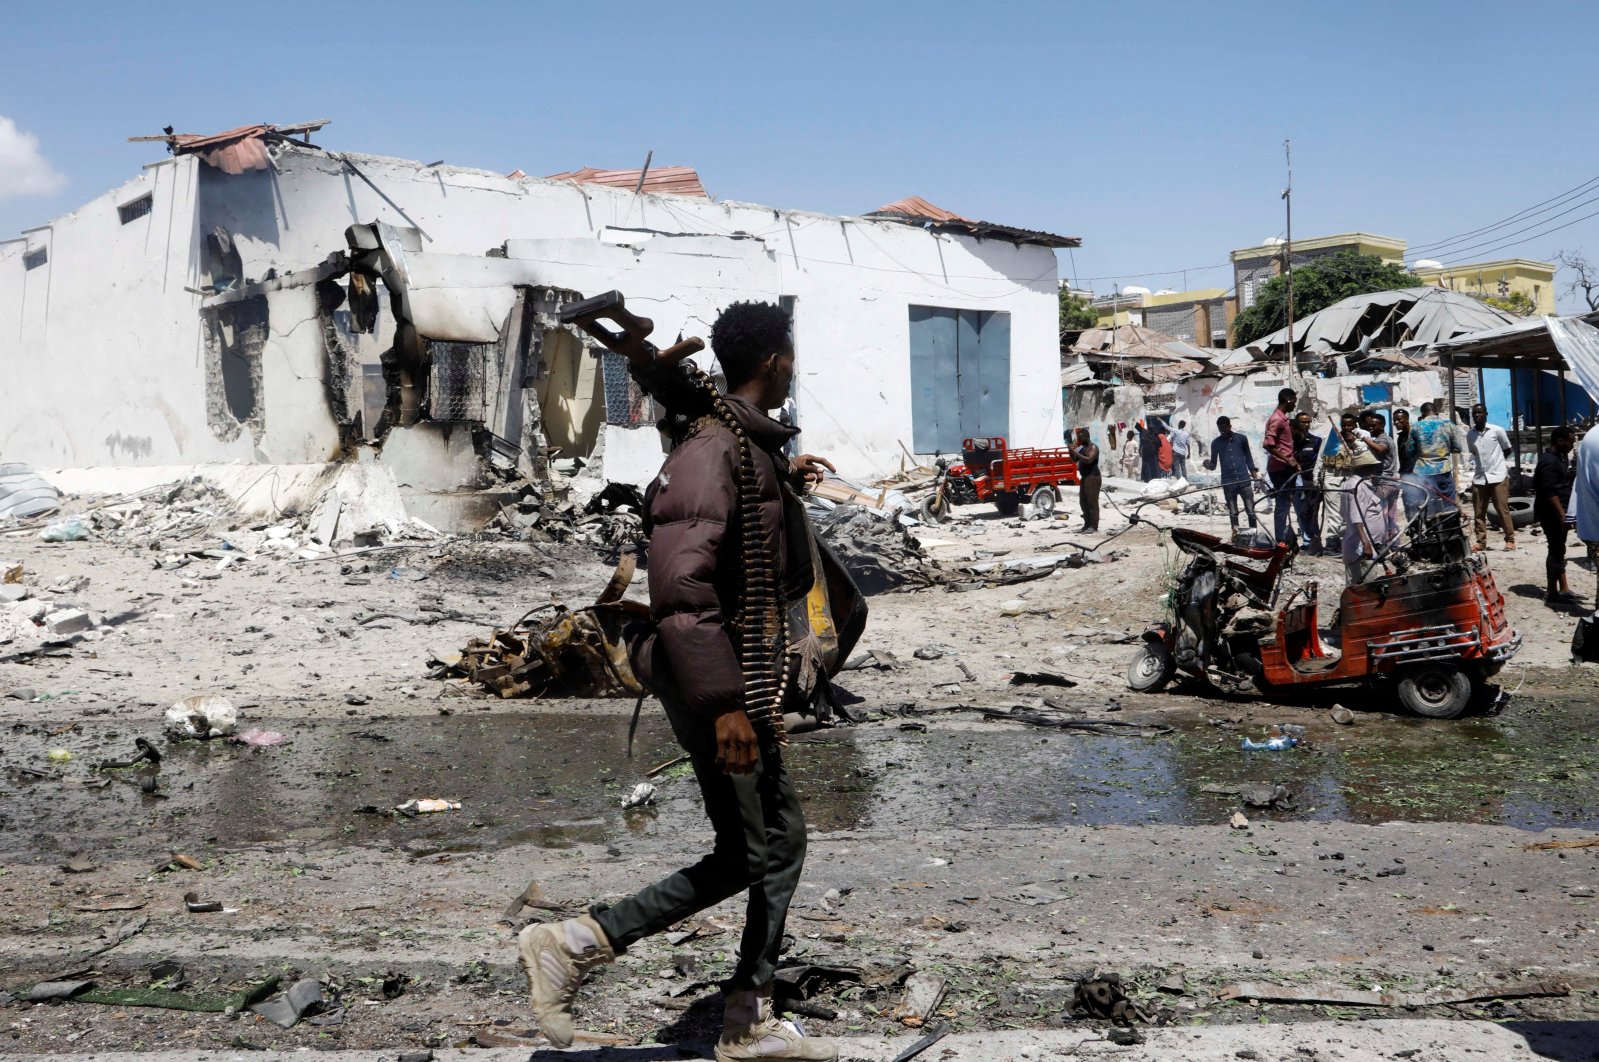 A security officer walks at the scene of an explosion in the Hamarweyne district of Mogadishu, Somalia, Jan. 12, 2022. (Reuters Photo)